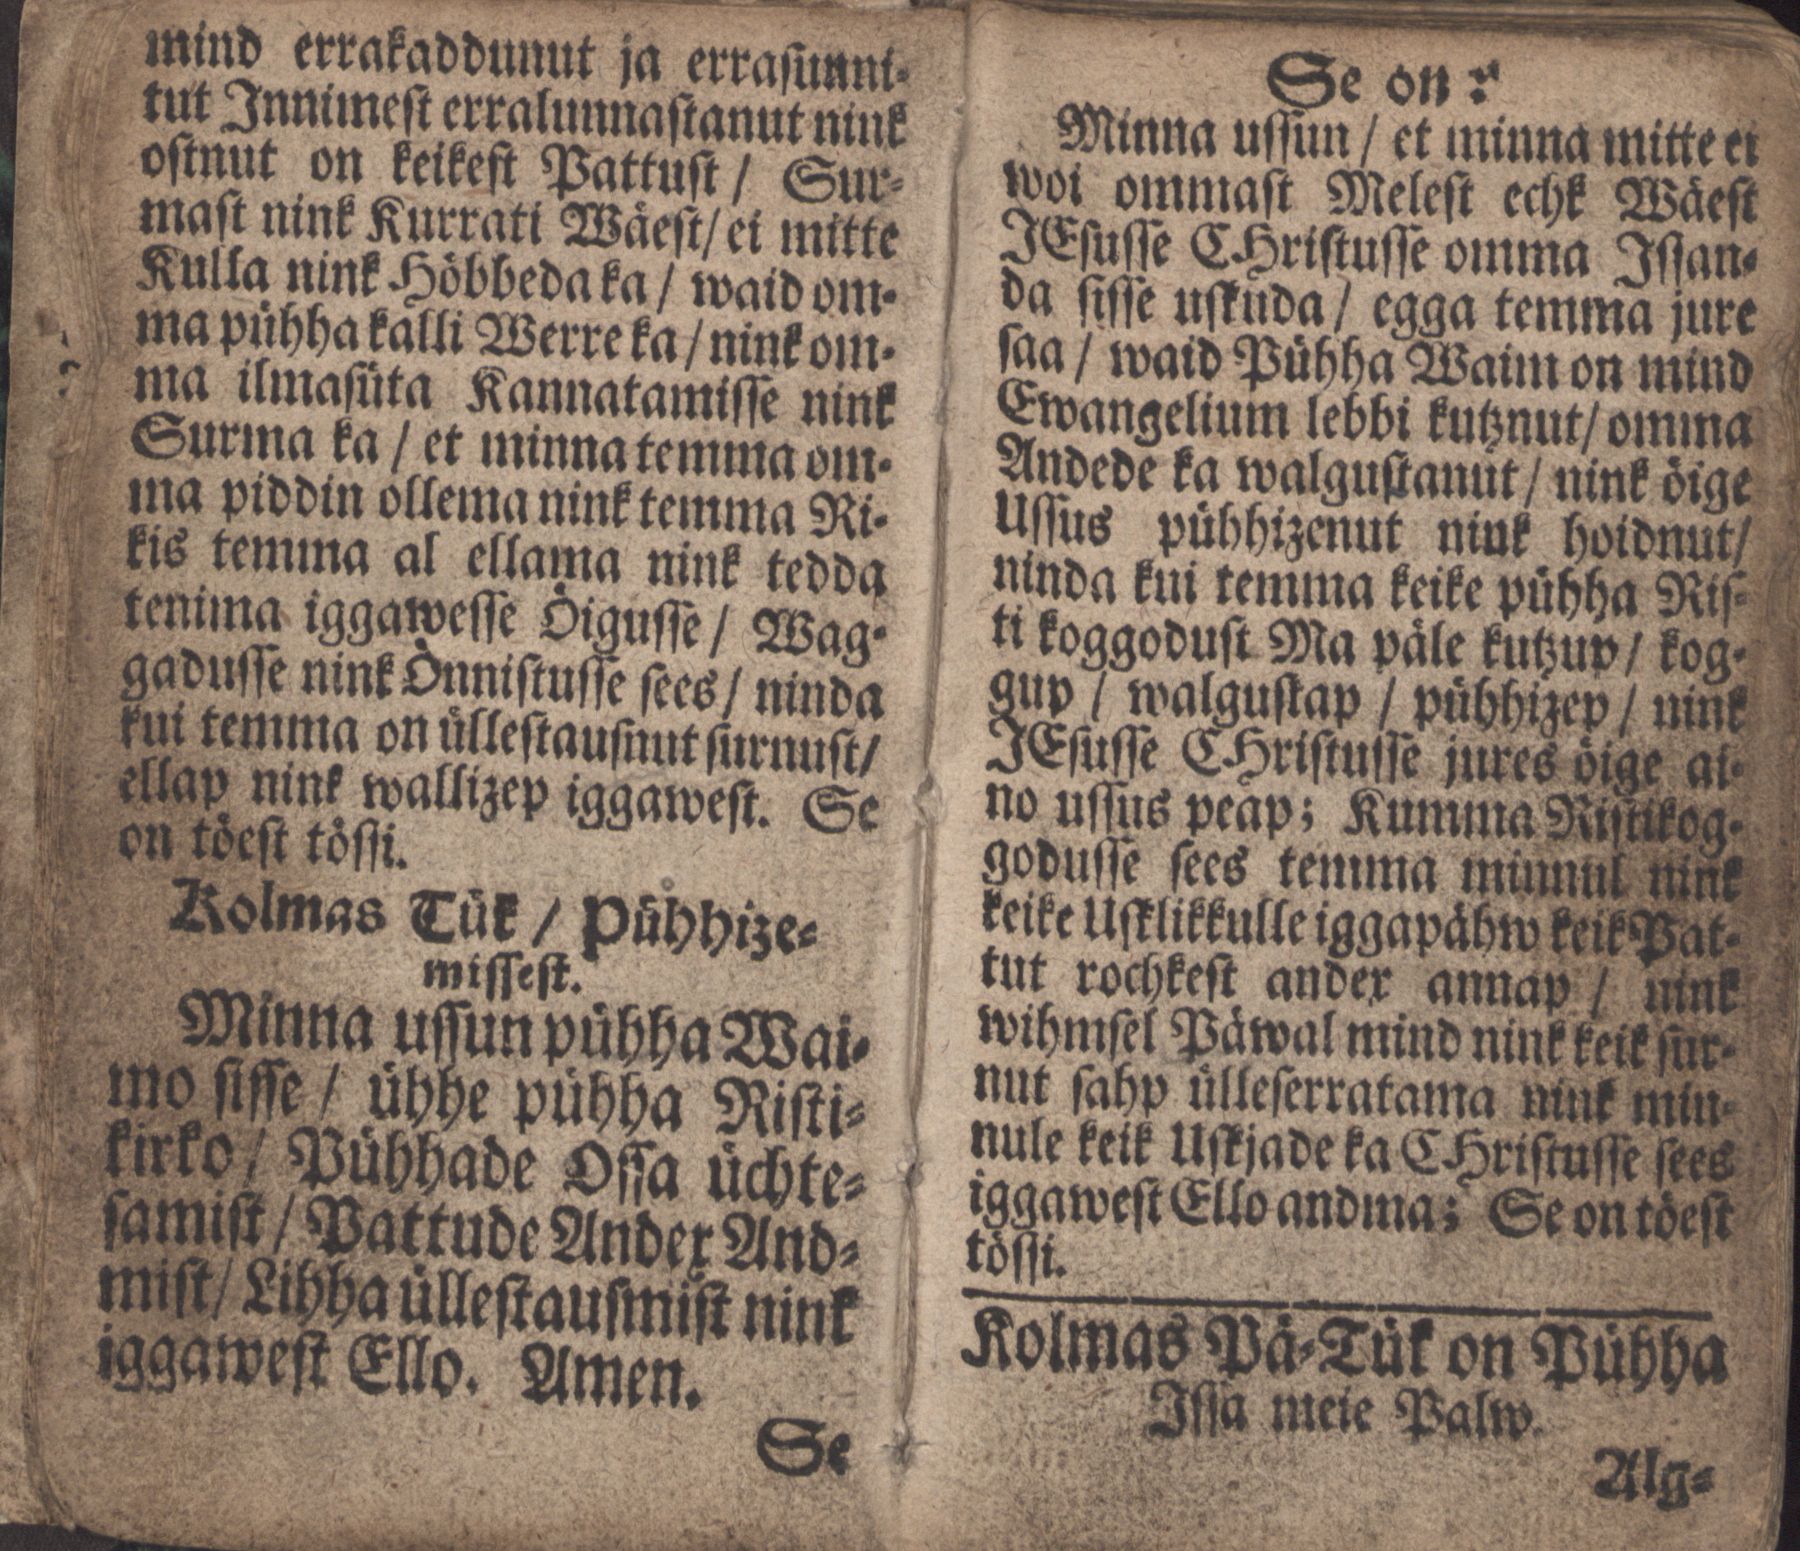 D. Mart. Lutterusse Katechismus (1700) | 7. Main body of text